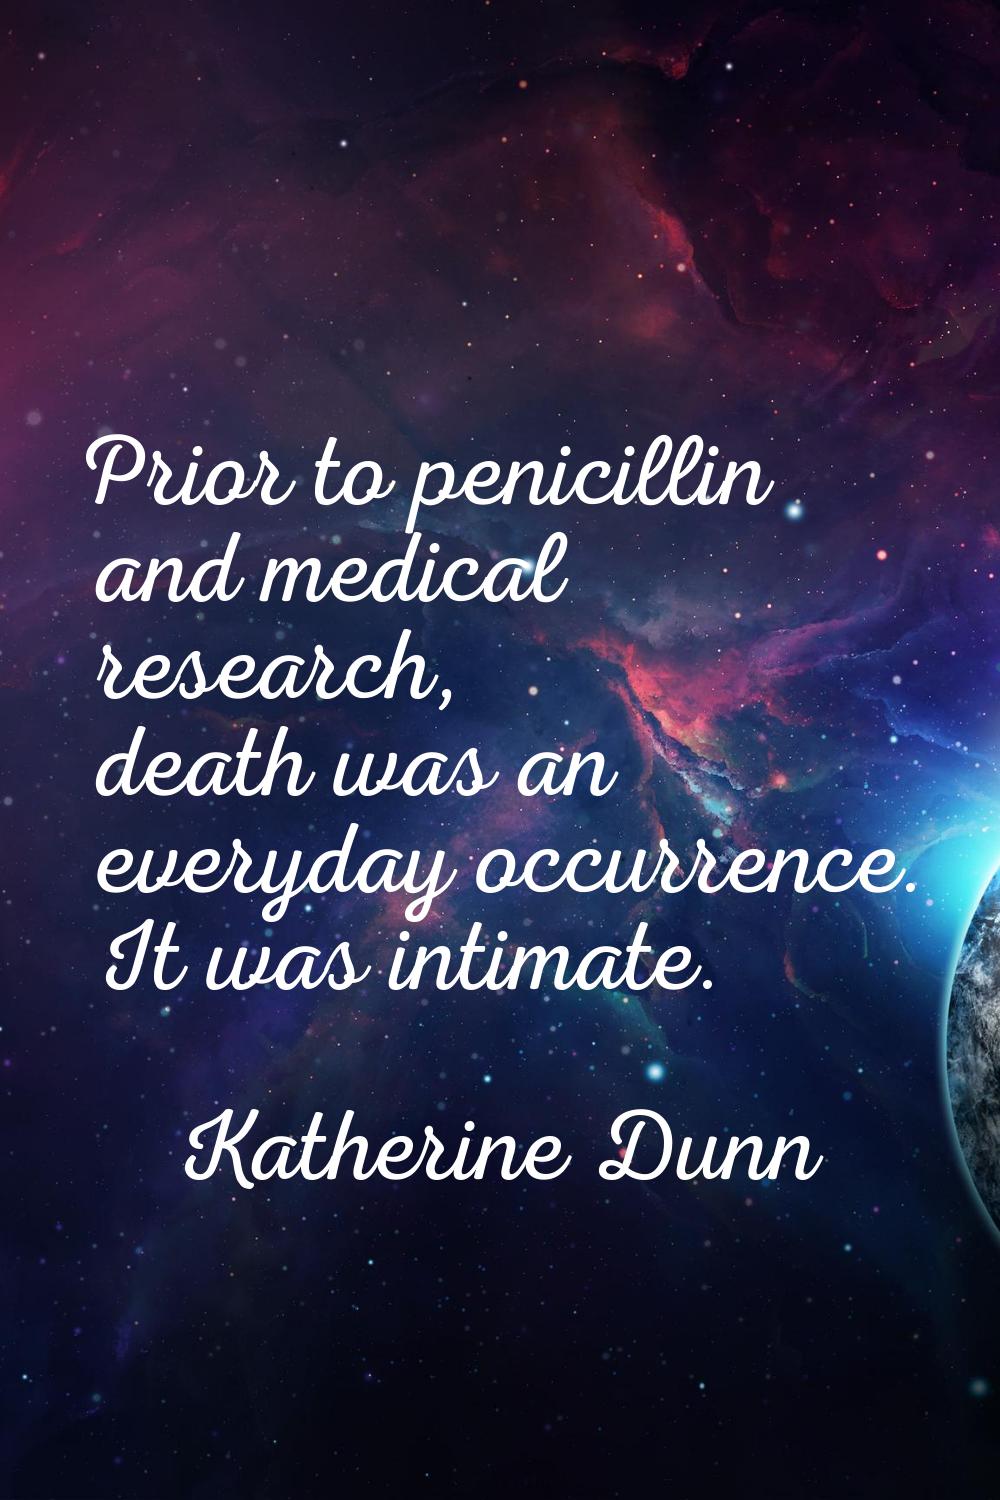 Prior to penicillin and medical research, death was an everyday occurrence. It was intimate.